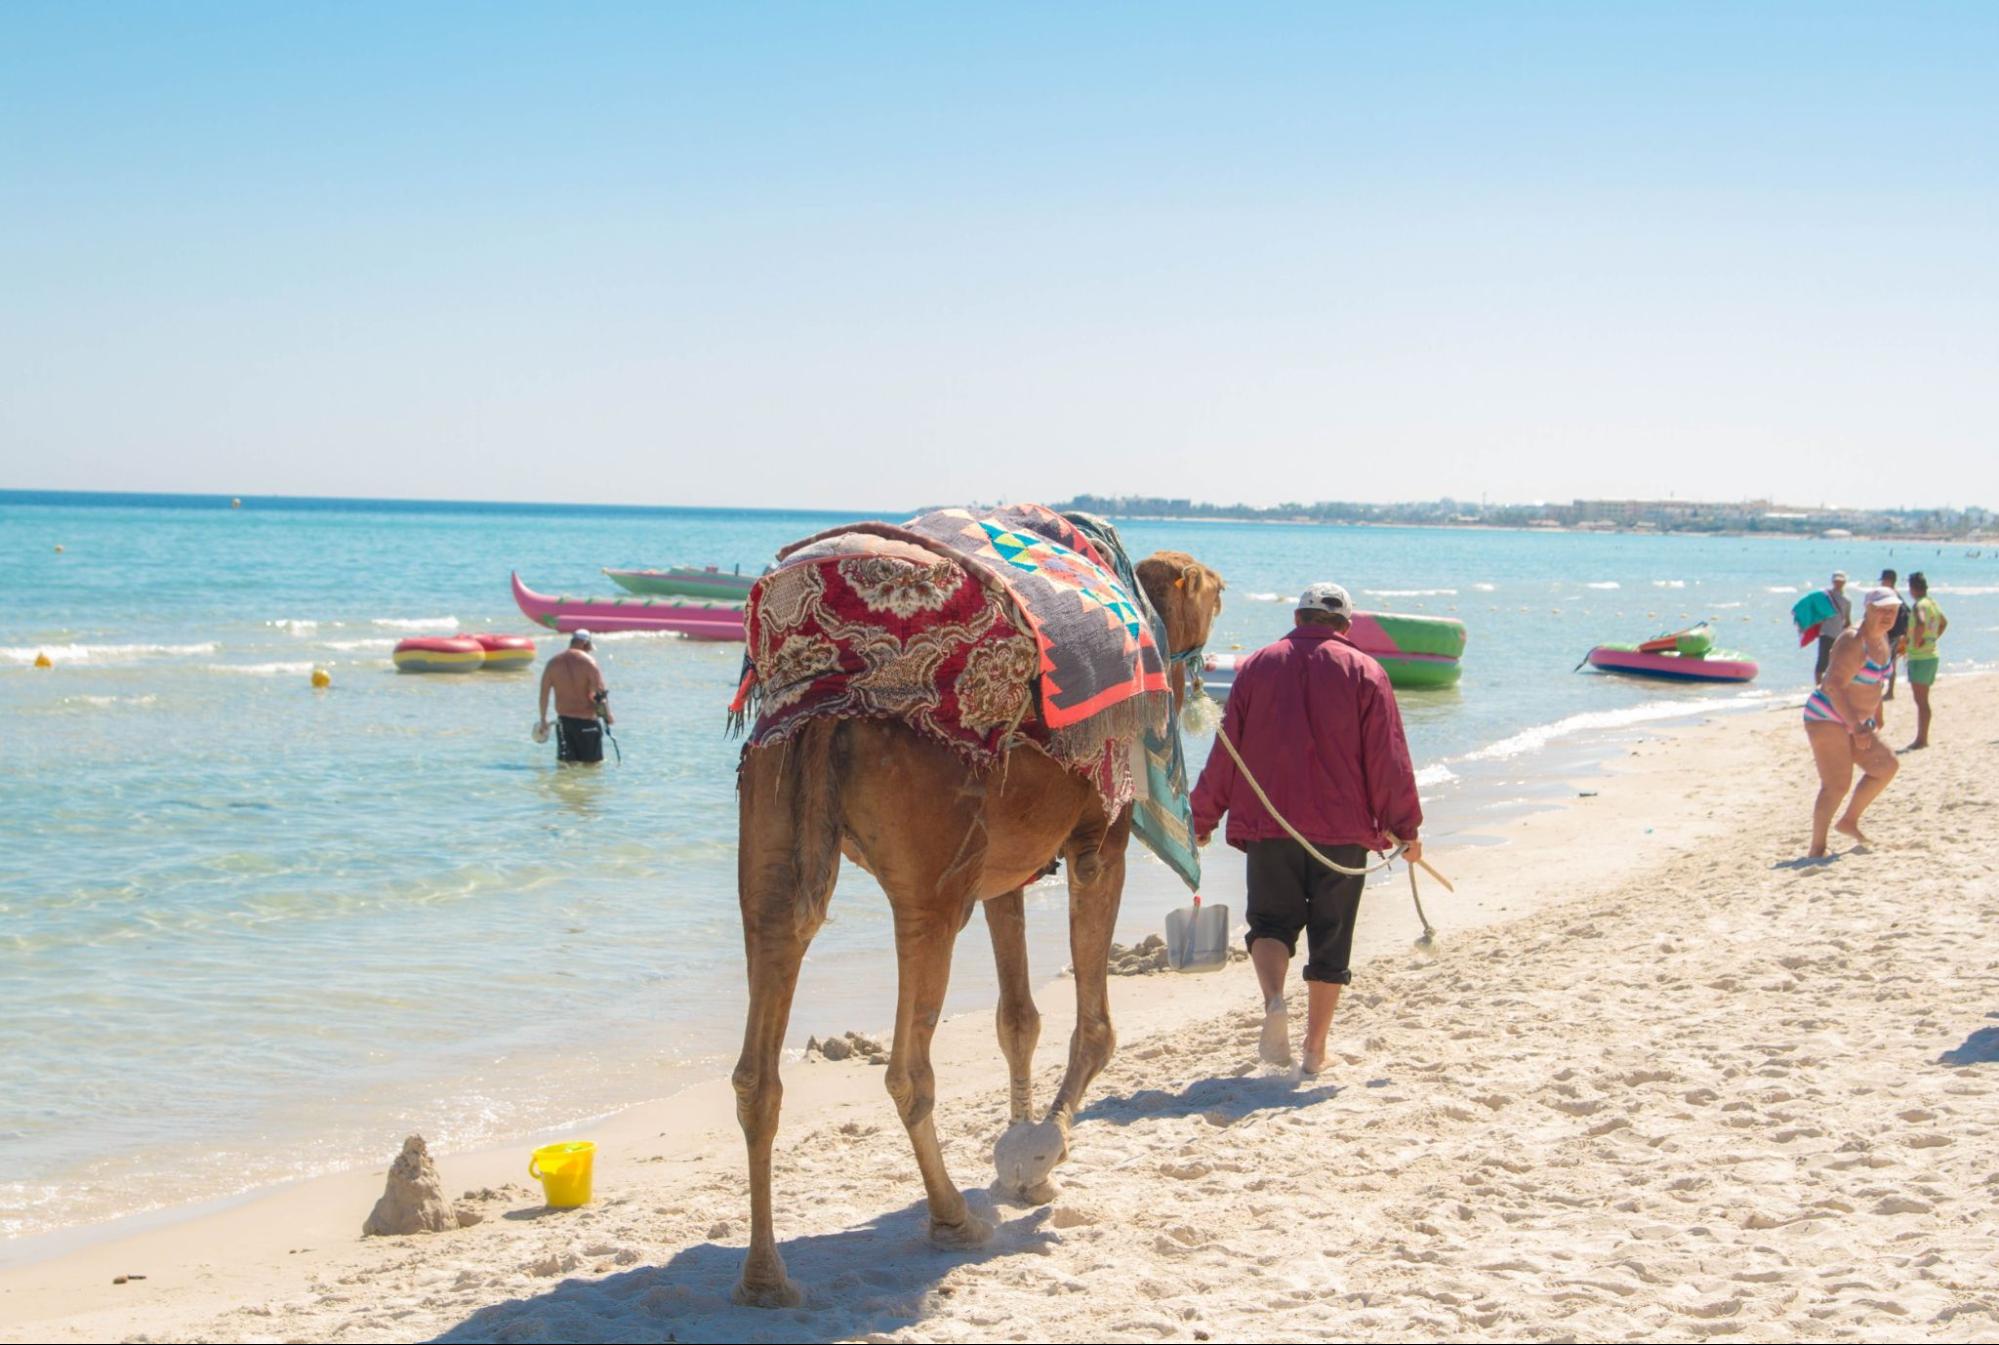 A camel is walking along the coast of the Mediterranean Sea